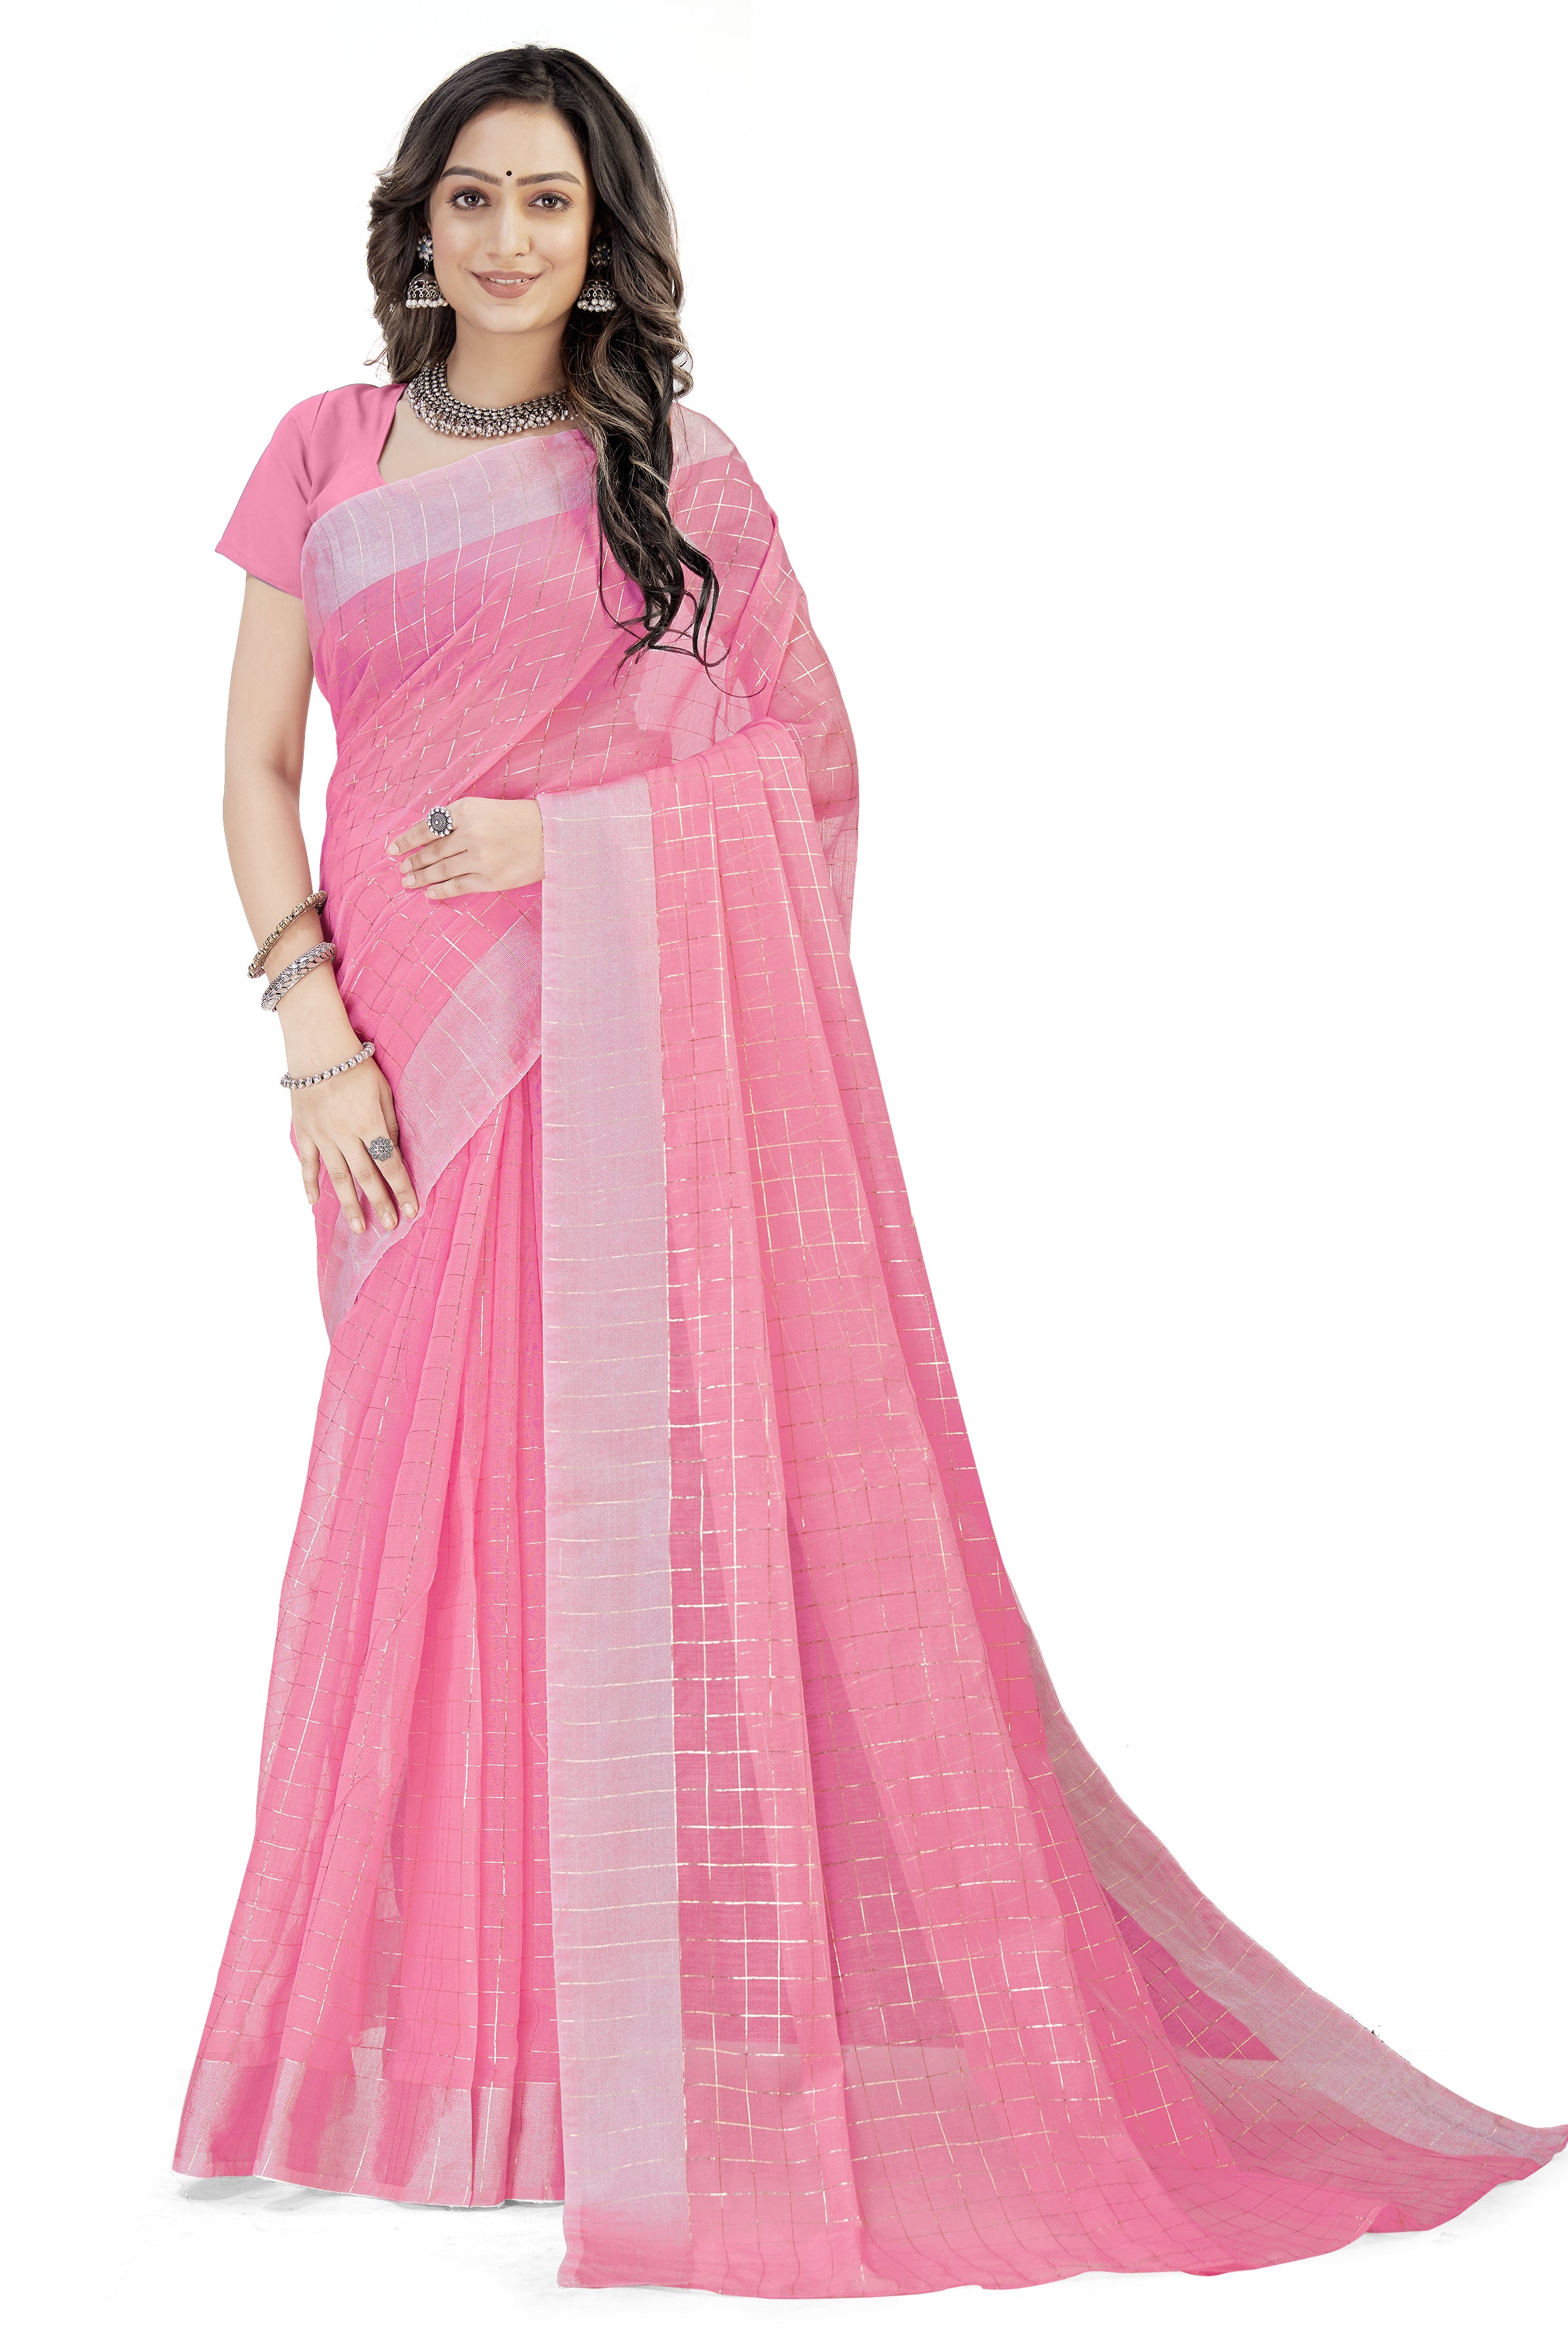 Women's self Woven Checked Daily Wear Cotton Blend Sari With Blouse Piece (Pink) - NIMIDHYA